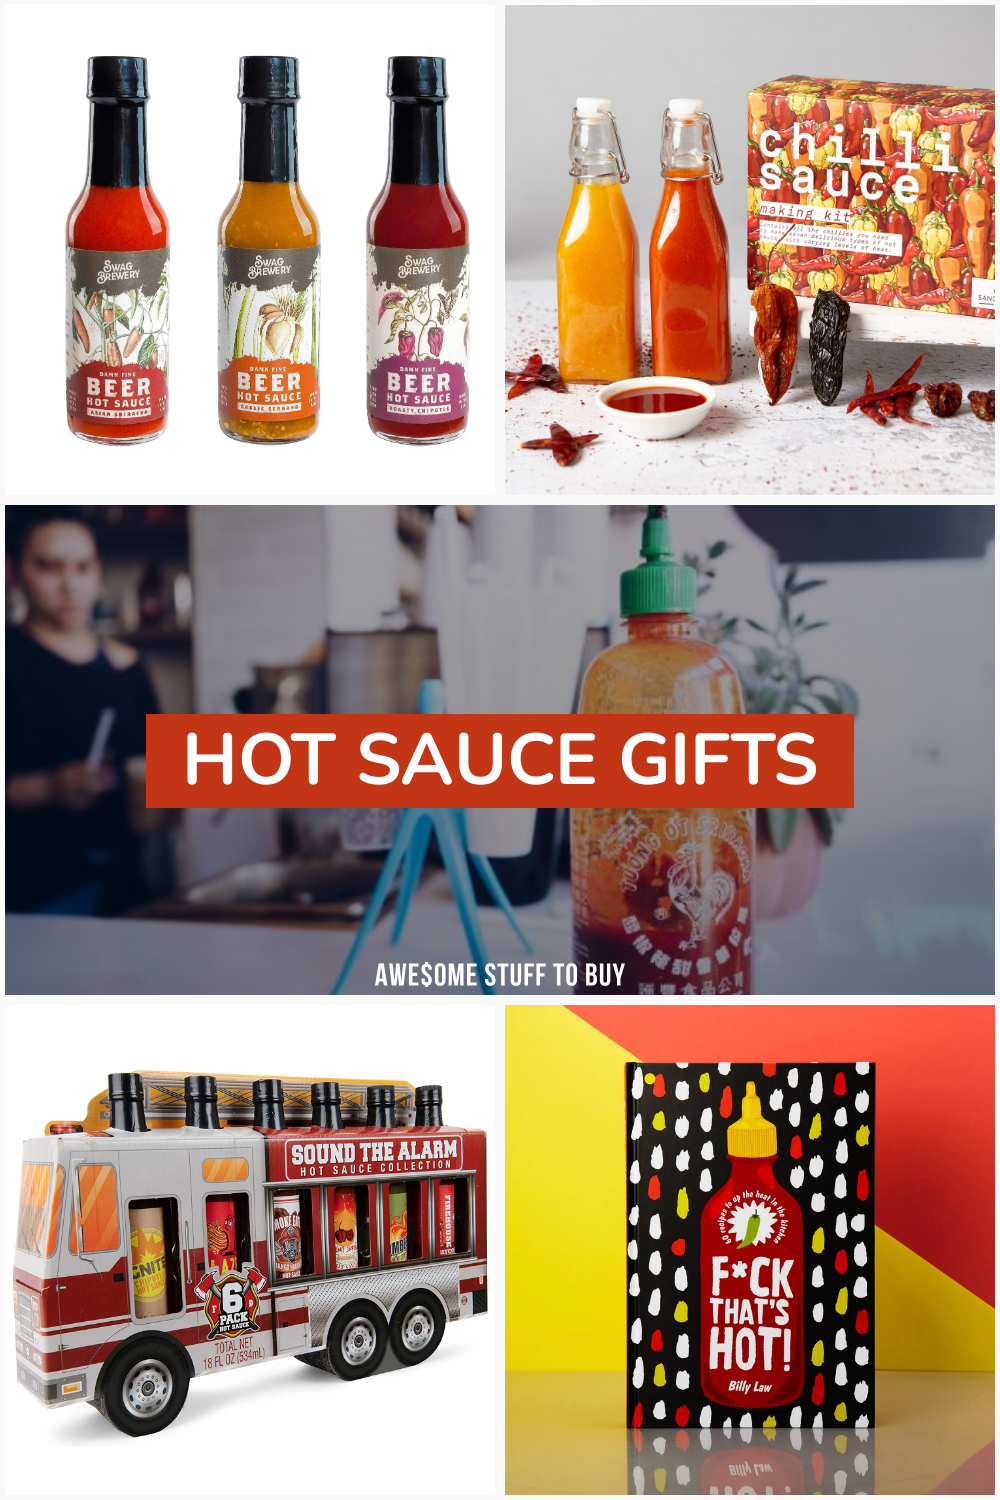 Hot Sauce Gifts // Awesome Stuff to Buy